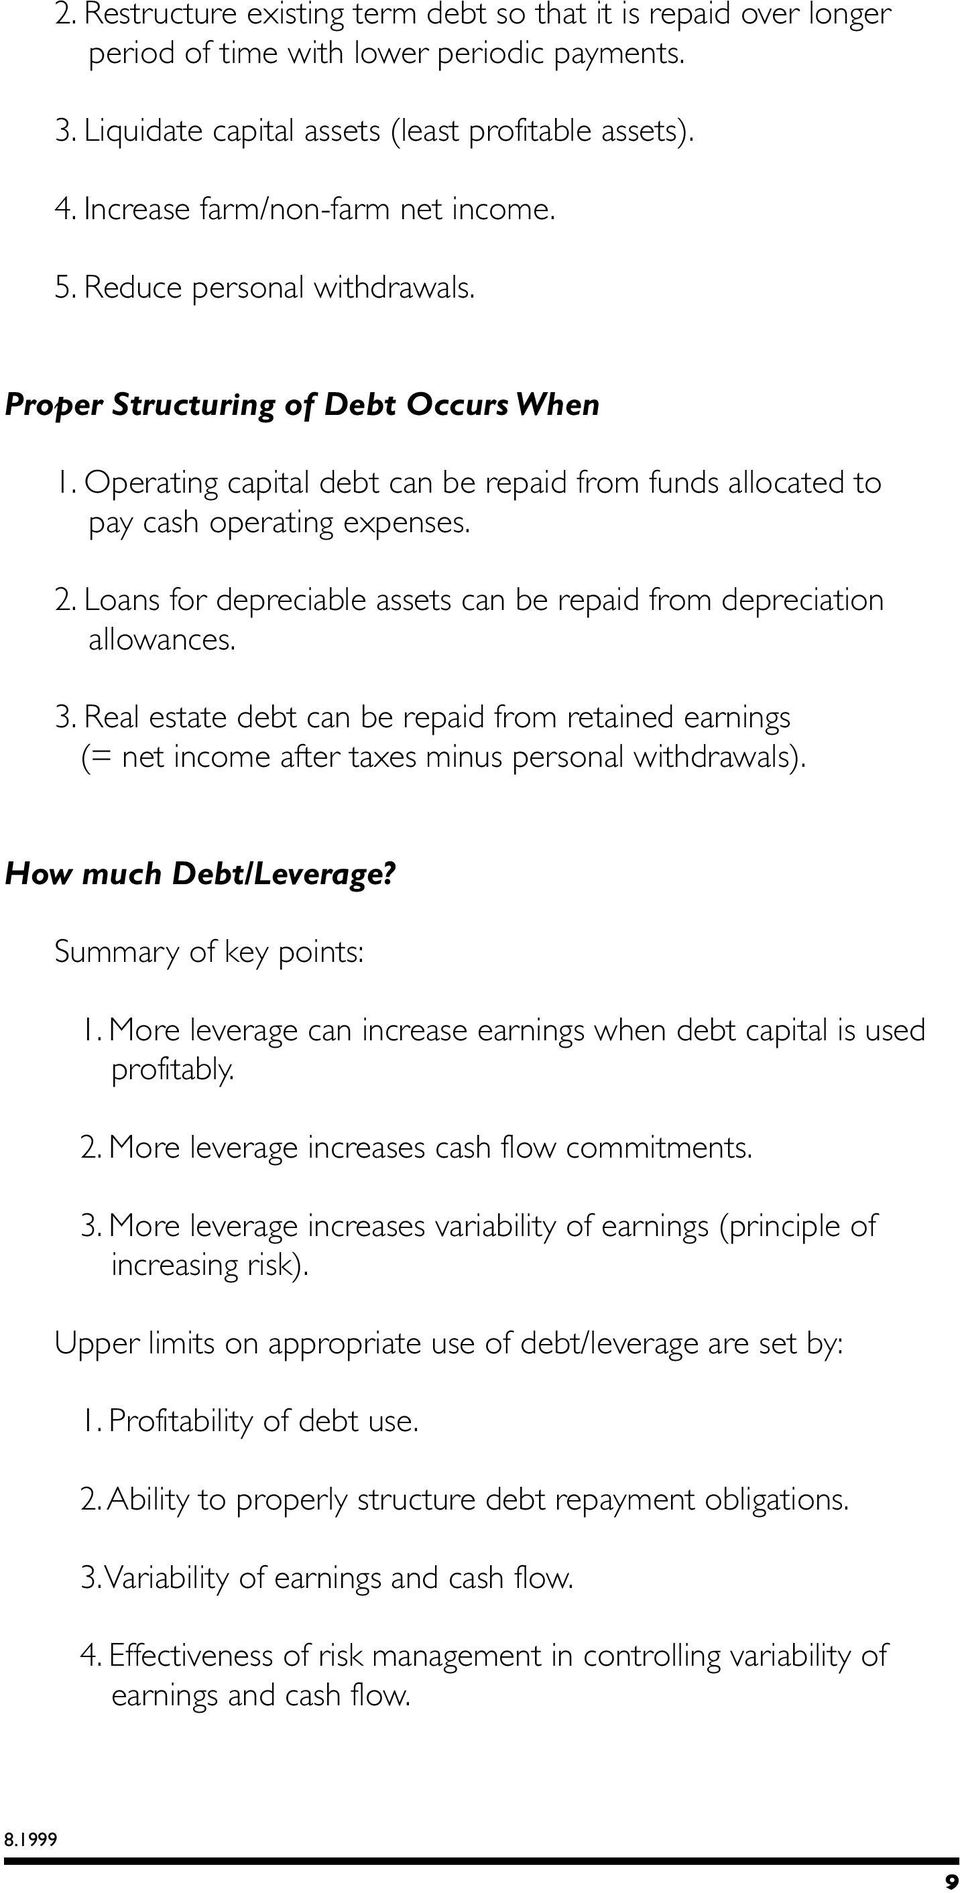 2. Loans for depreciable assets can be repaid from depreciation allowances. 3. Real estate debt can be repaid from retained earnings (= net income after taxes minus personal withdrawals).